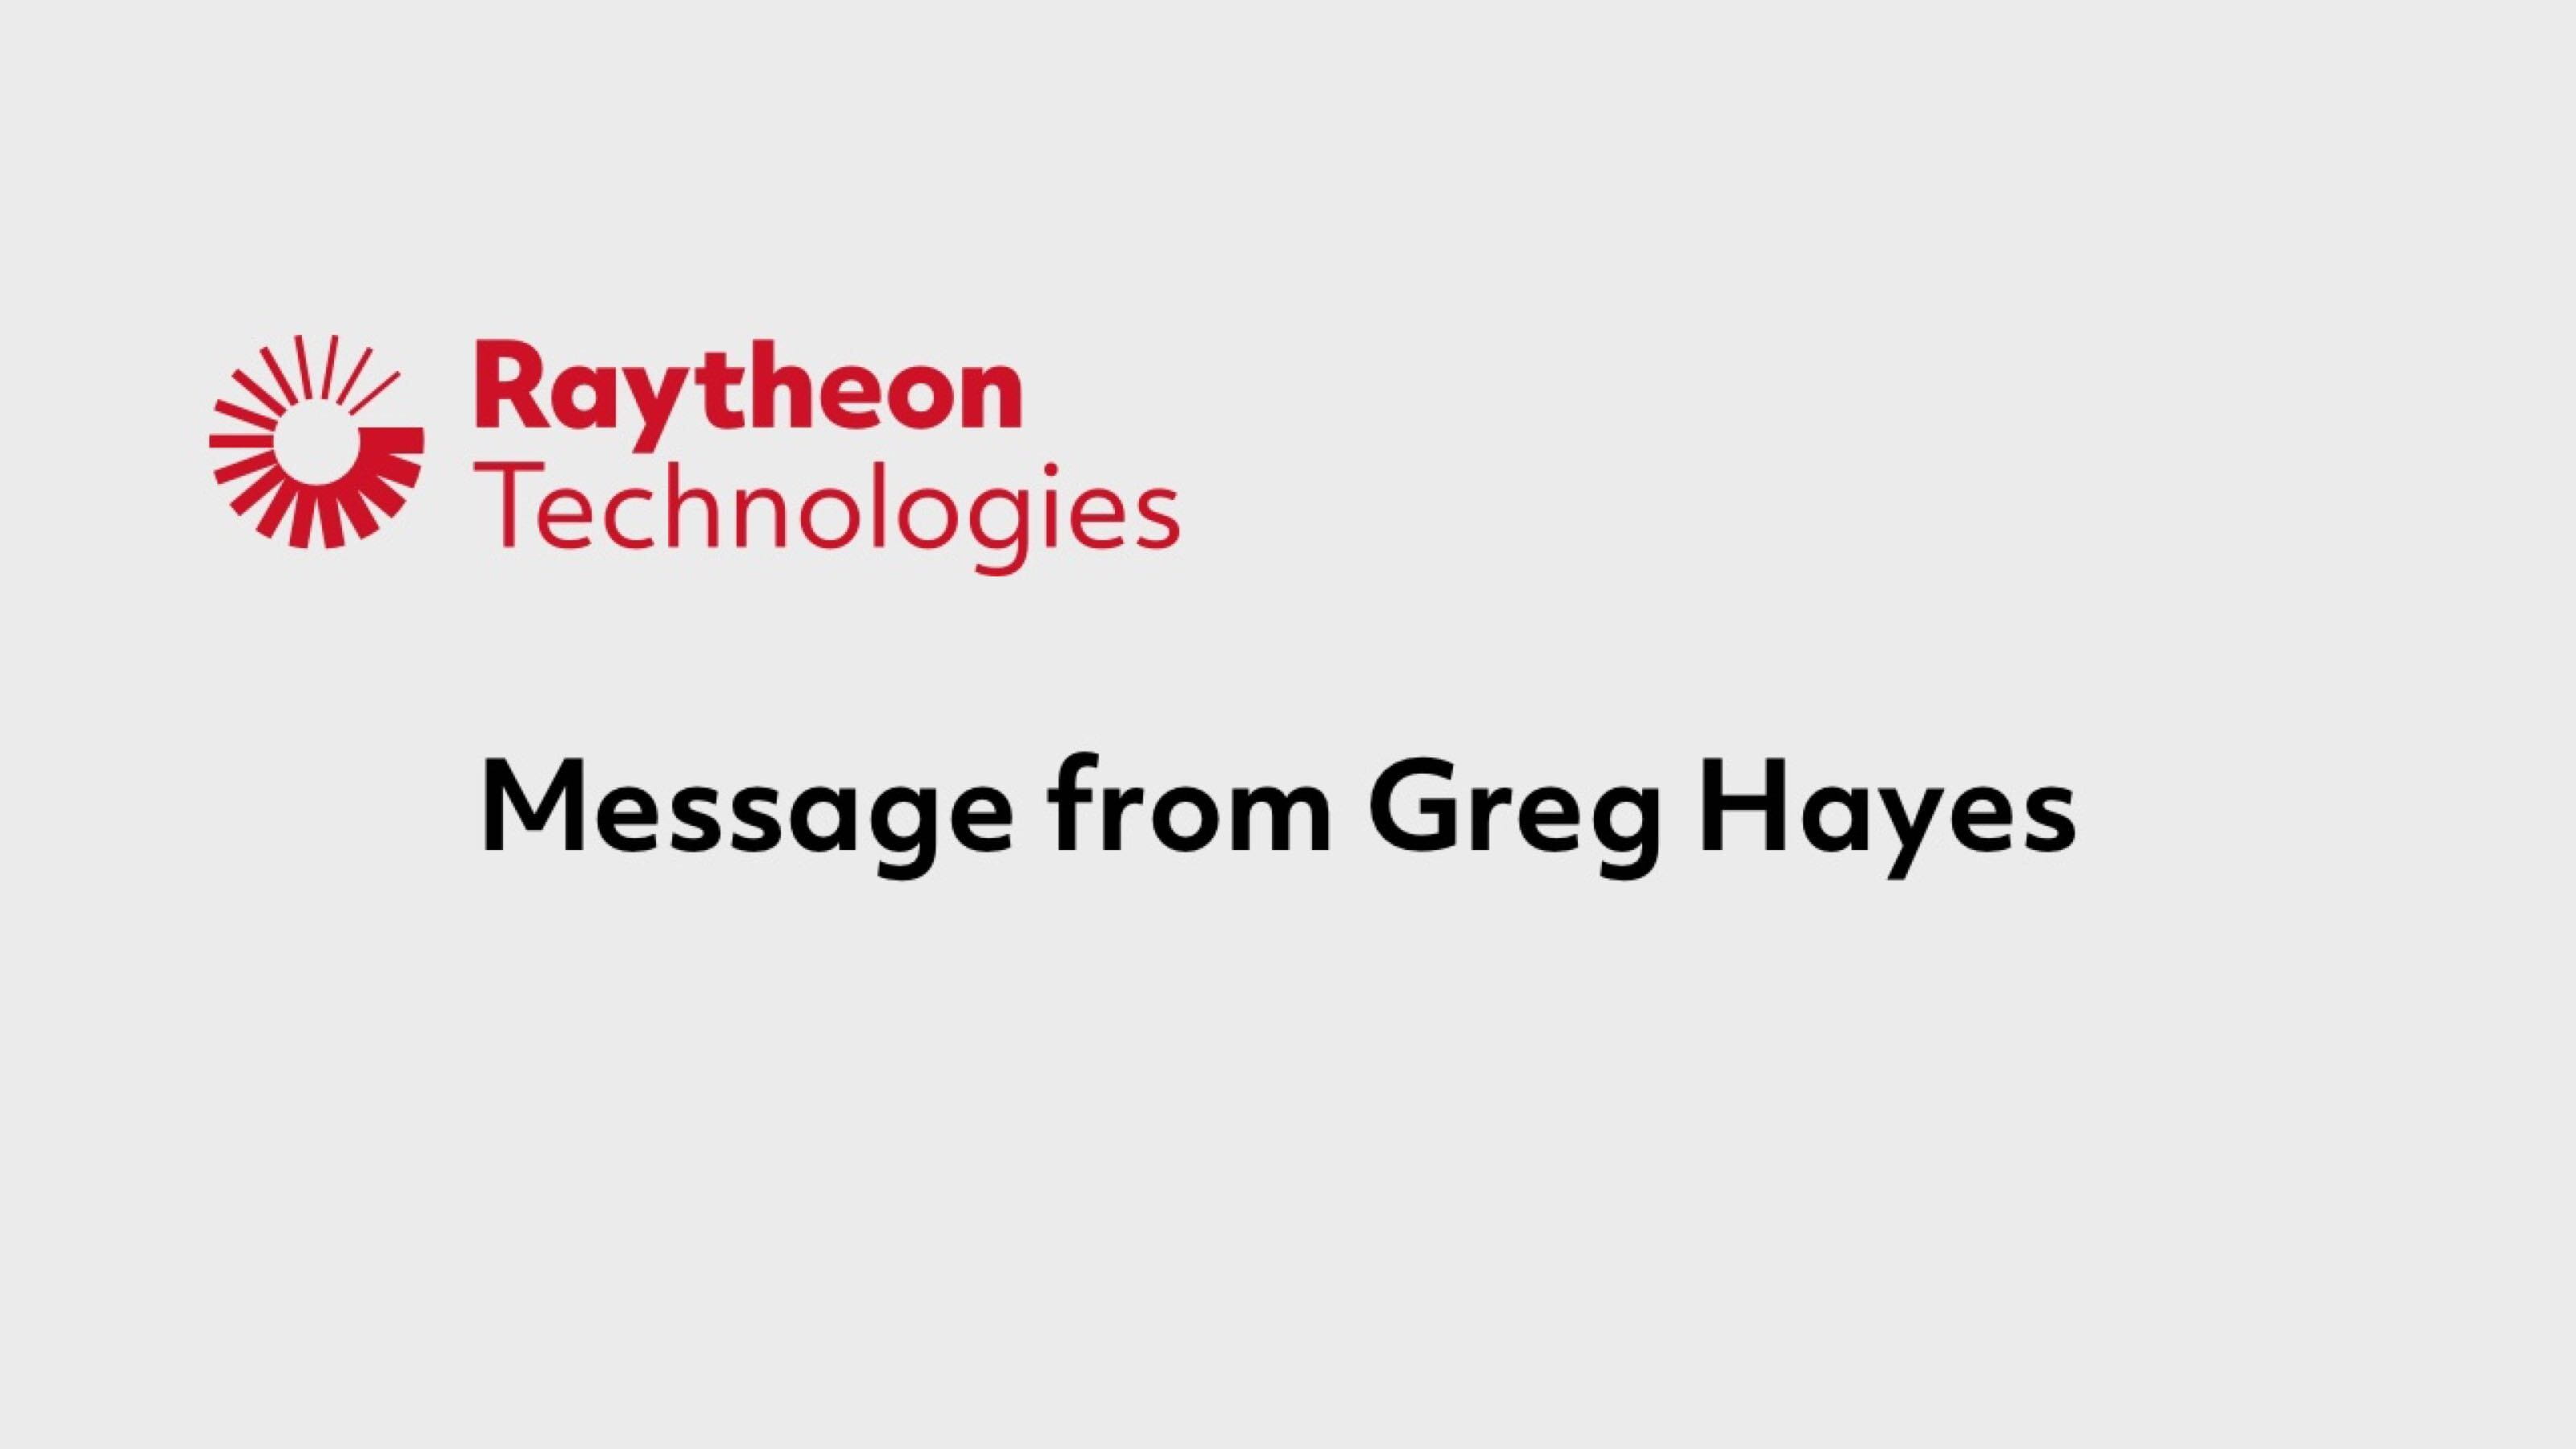 A Message from Greg Hayes